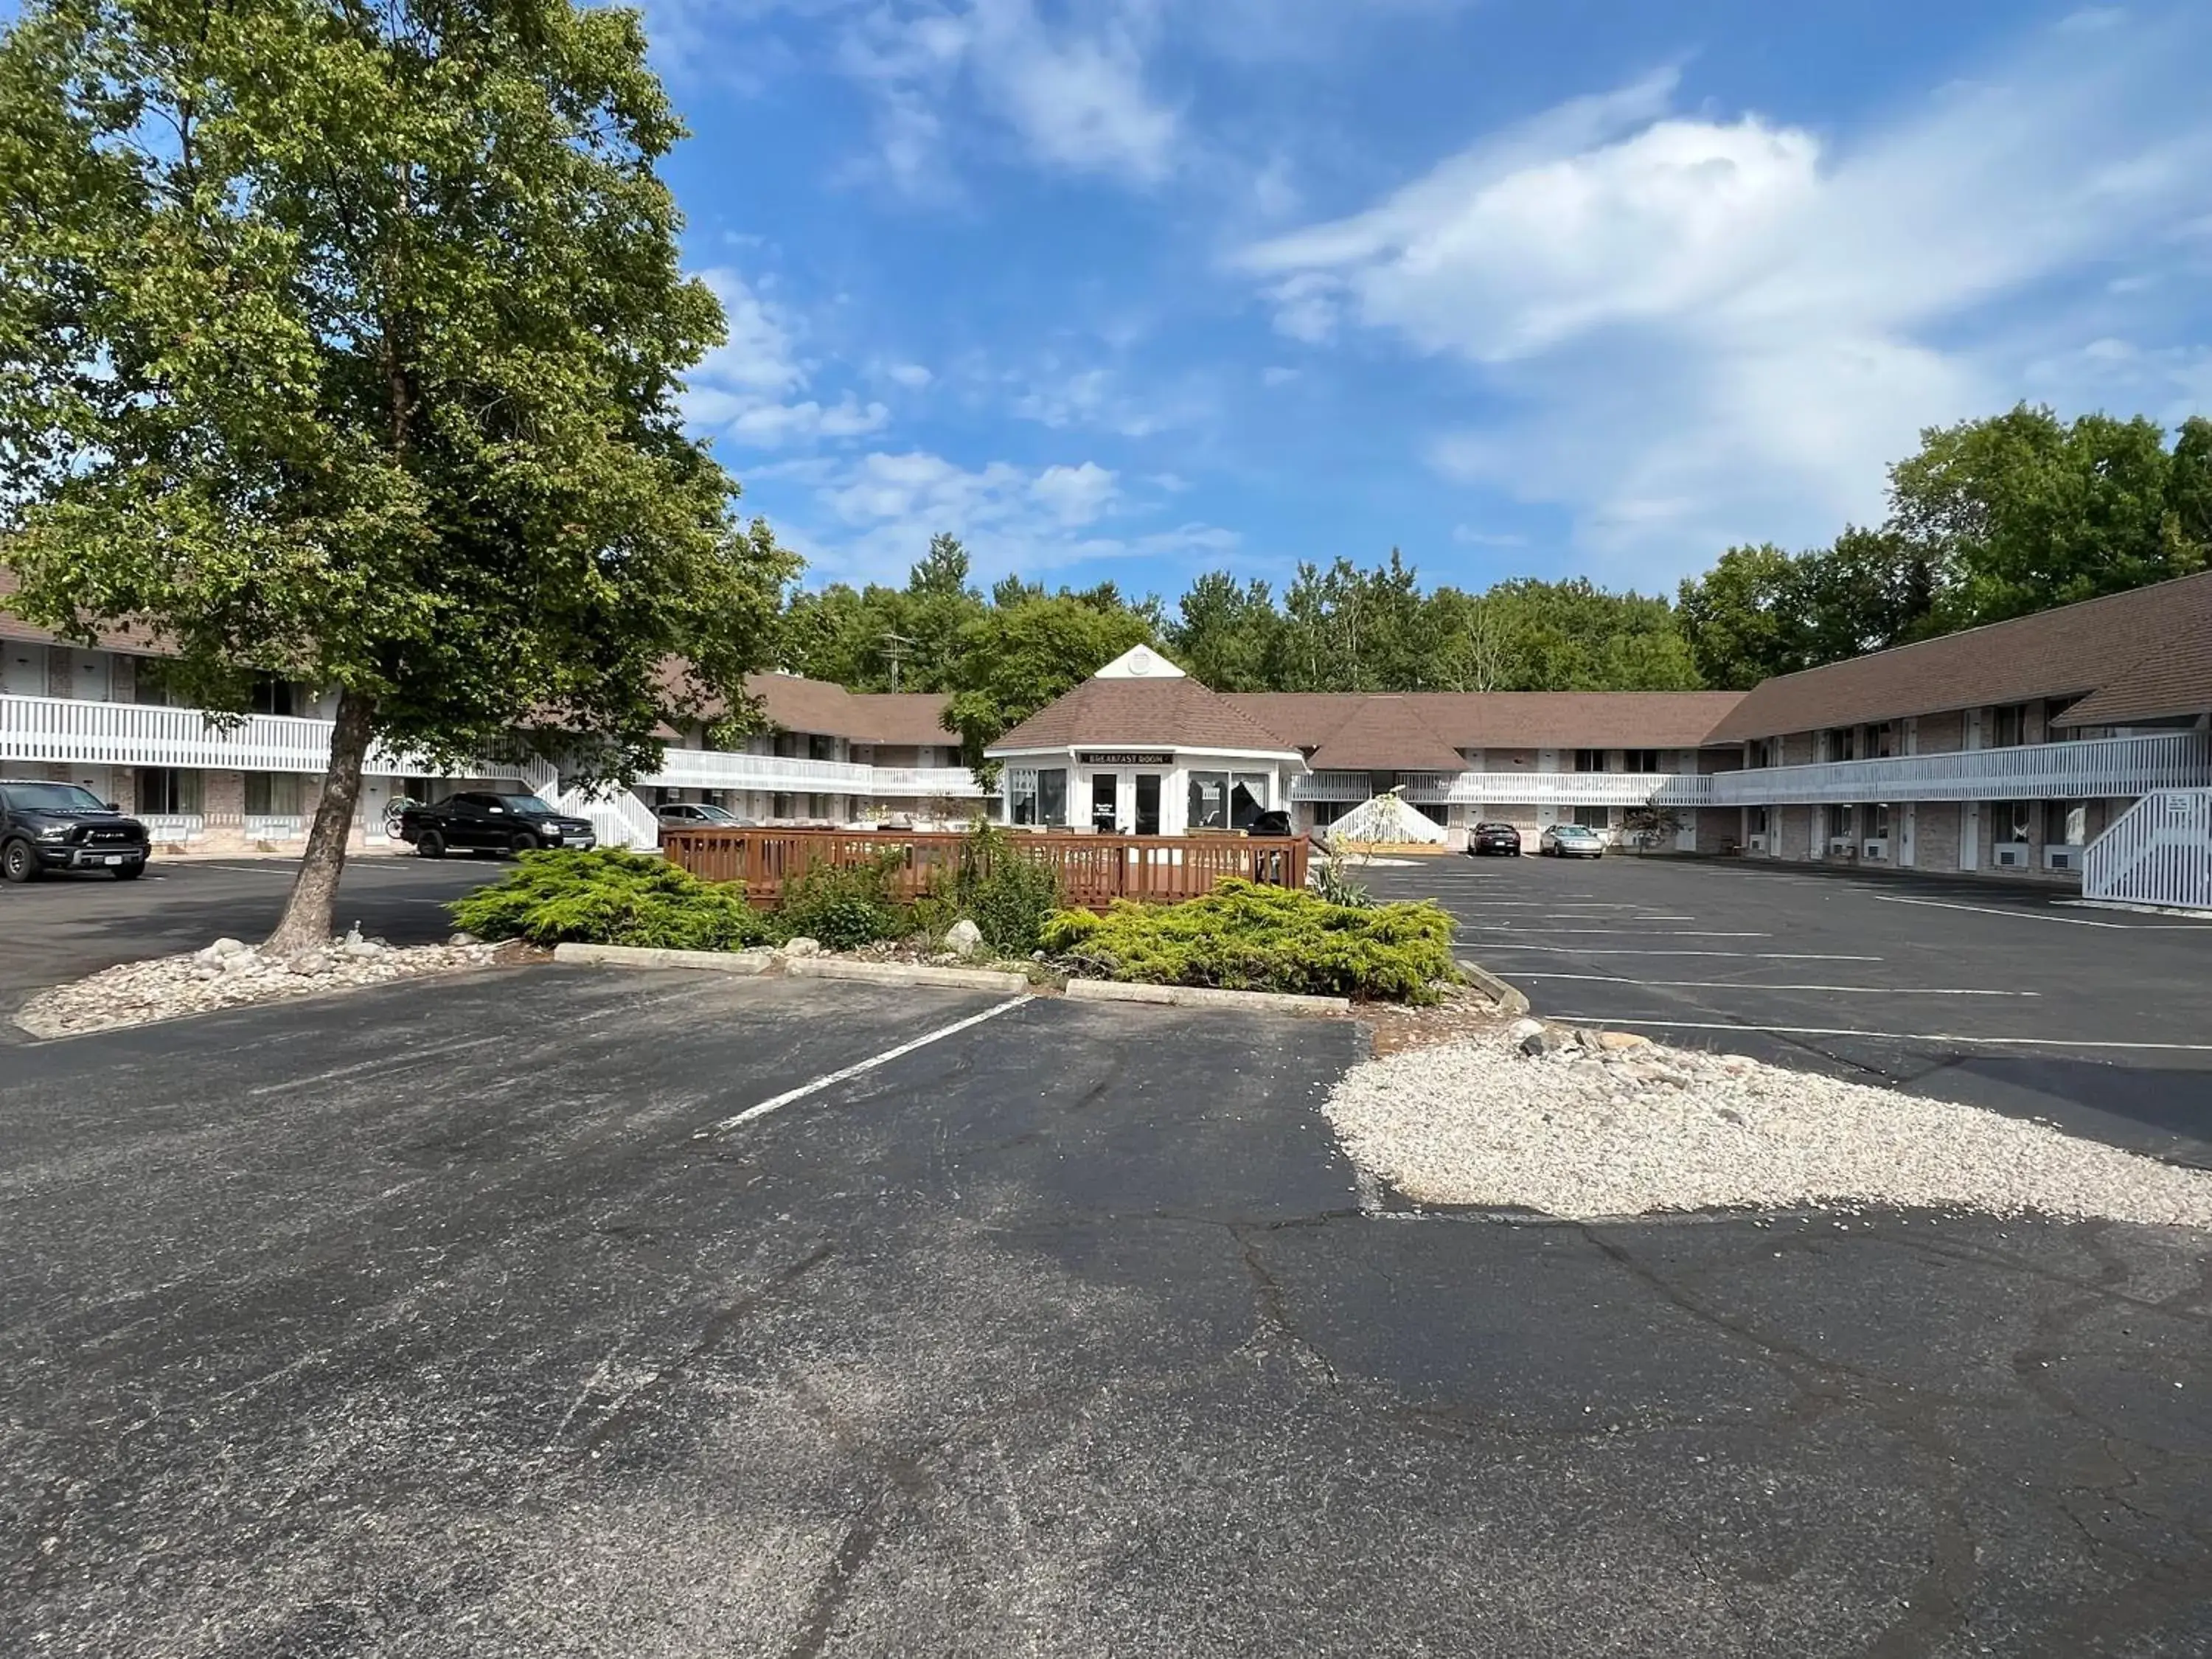 Property Building in Americas Best Value Inn Mackinaw City